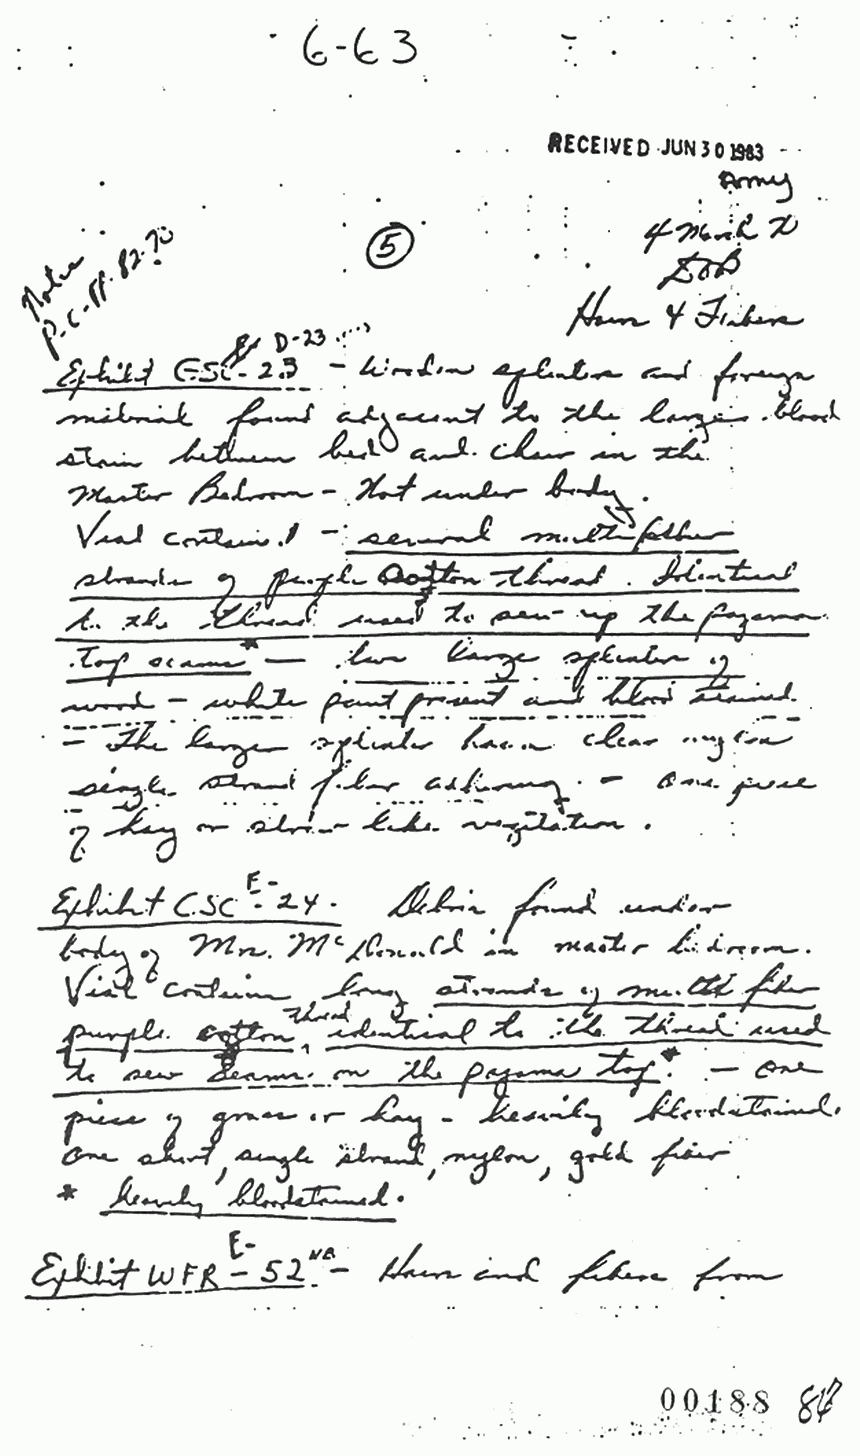 March 4, 1970: Notes of Dillard Browning (CID), p. 1 of 3